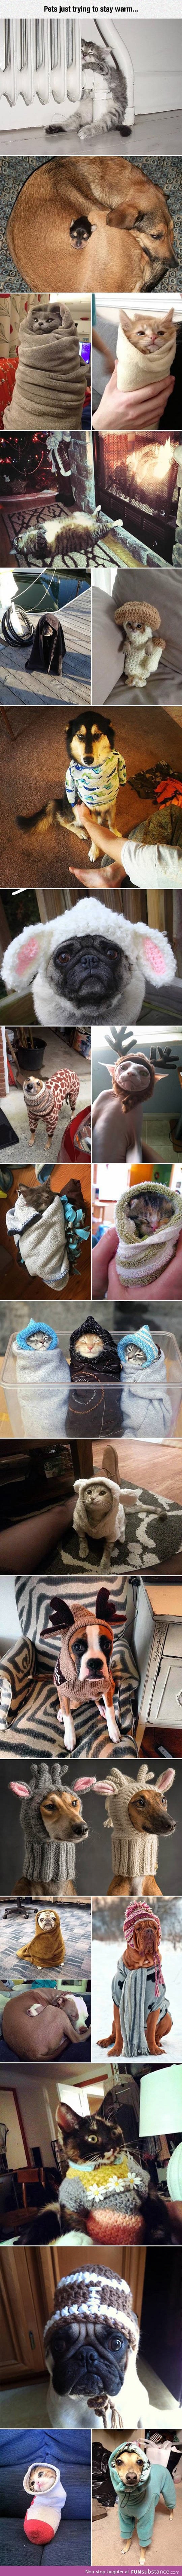 Pets trying their best to stay warm